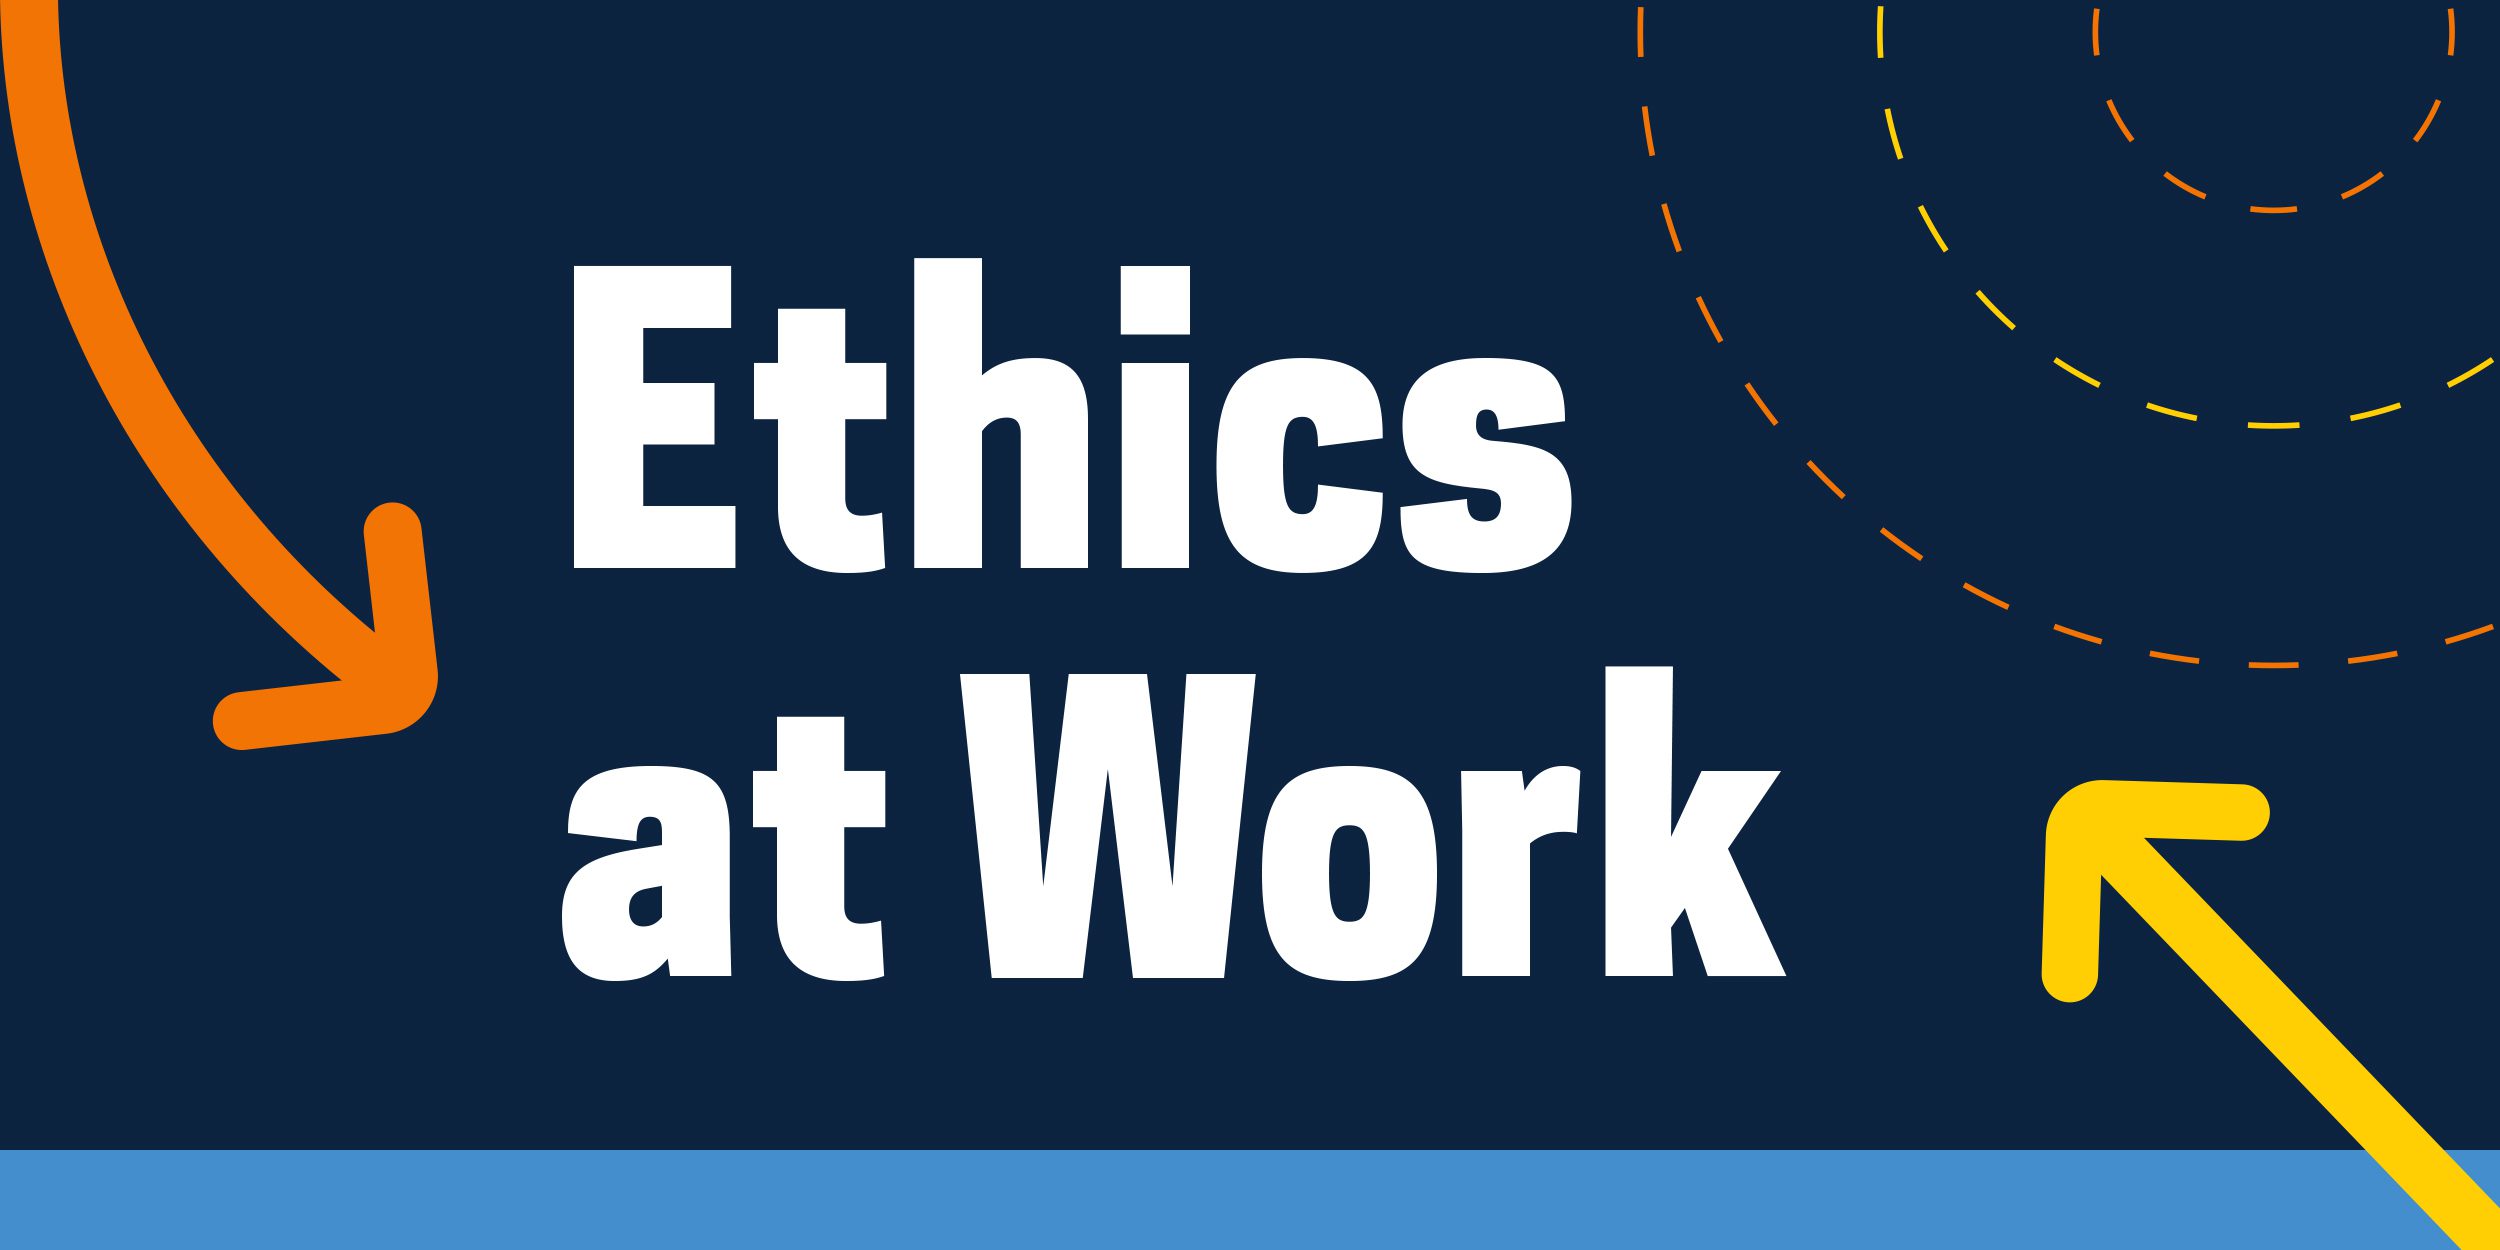 Introducing The Ethics at Work Podcast